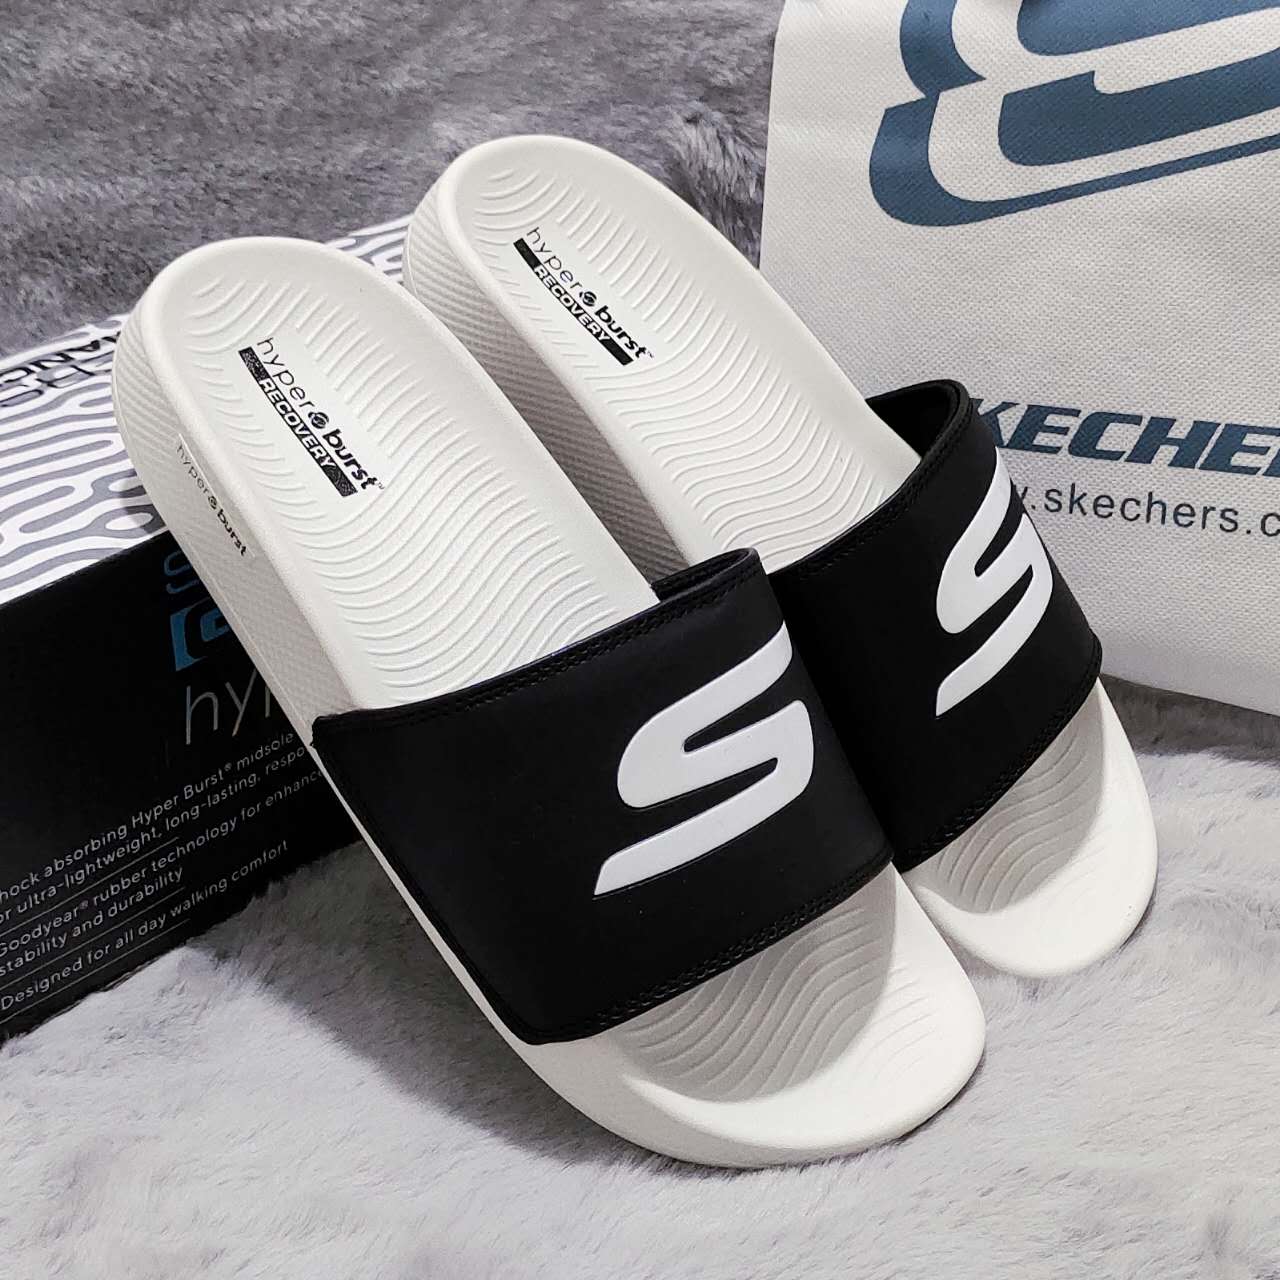 Buy Skechers Dynamight (Numeric_6) at Amazon.in